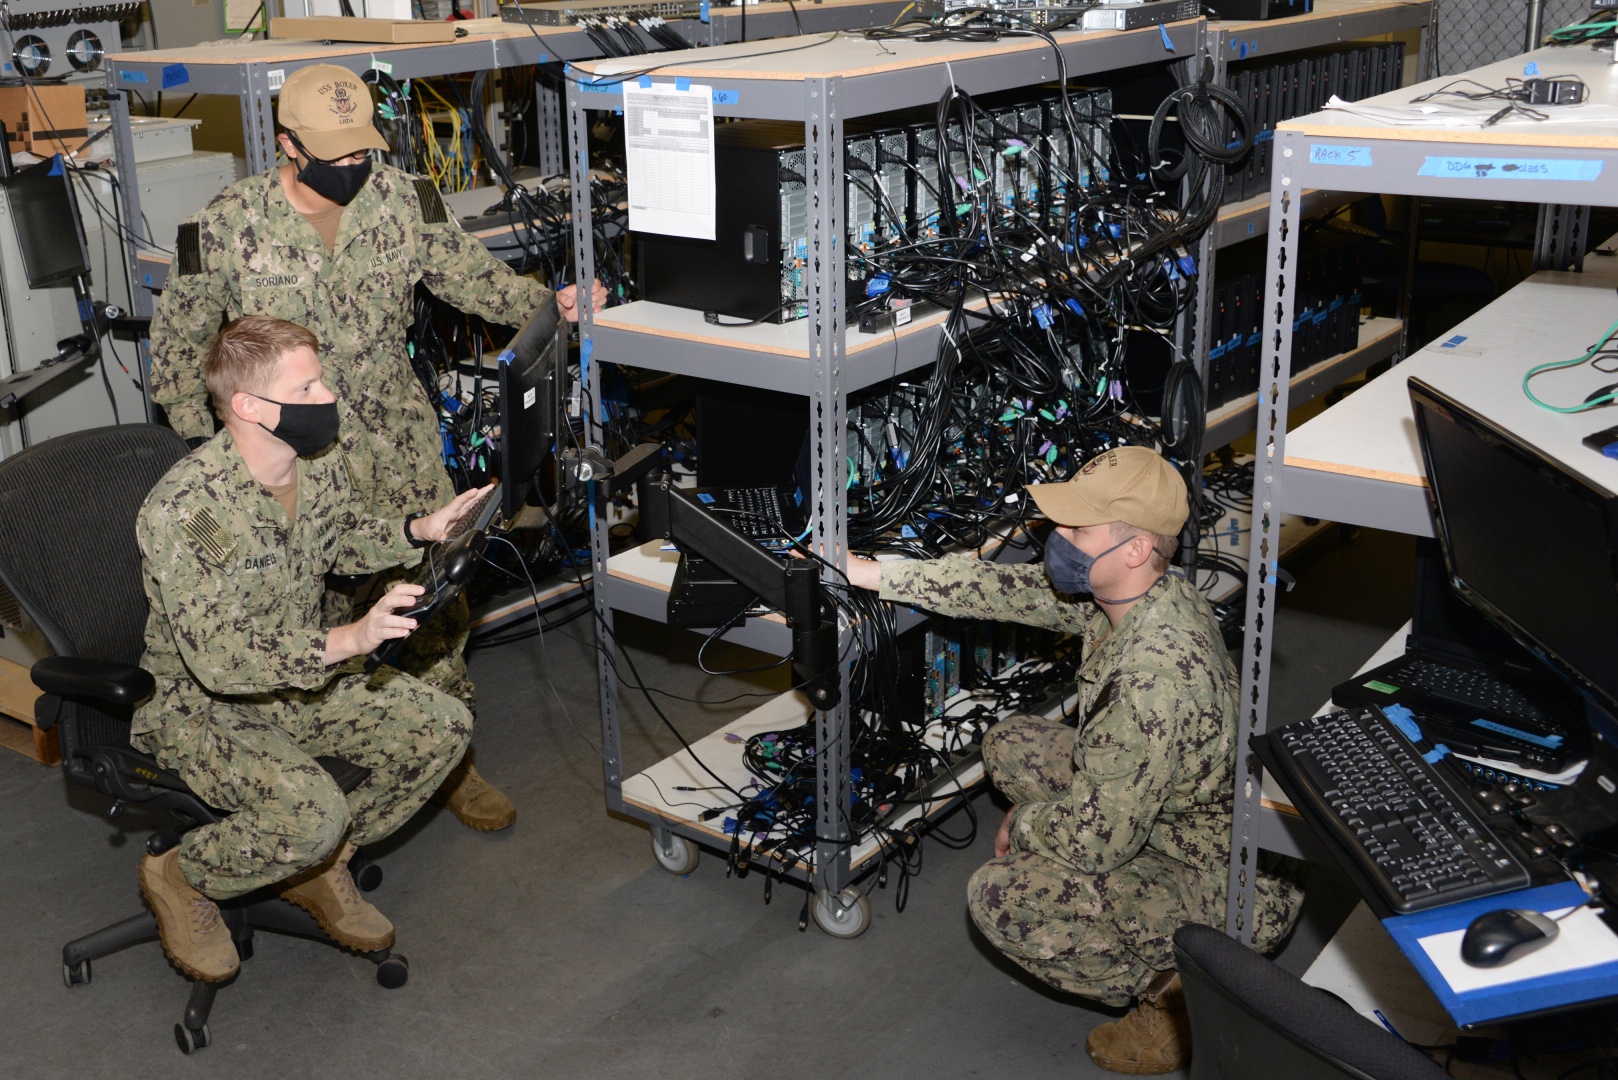 A Navy sailor explains software loading procedures to visiting Information Systems Technicians from USS Boxer